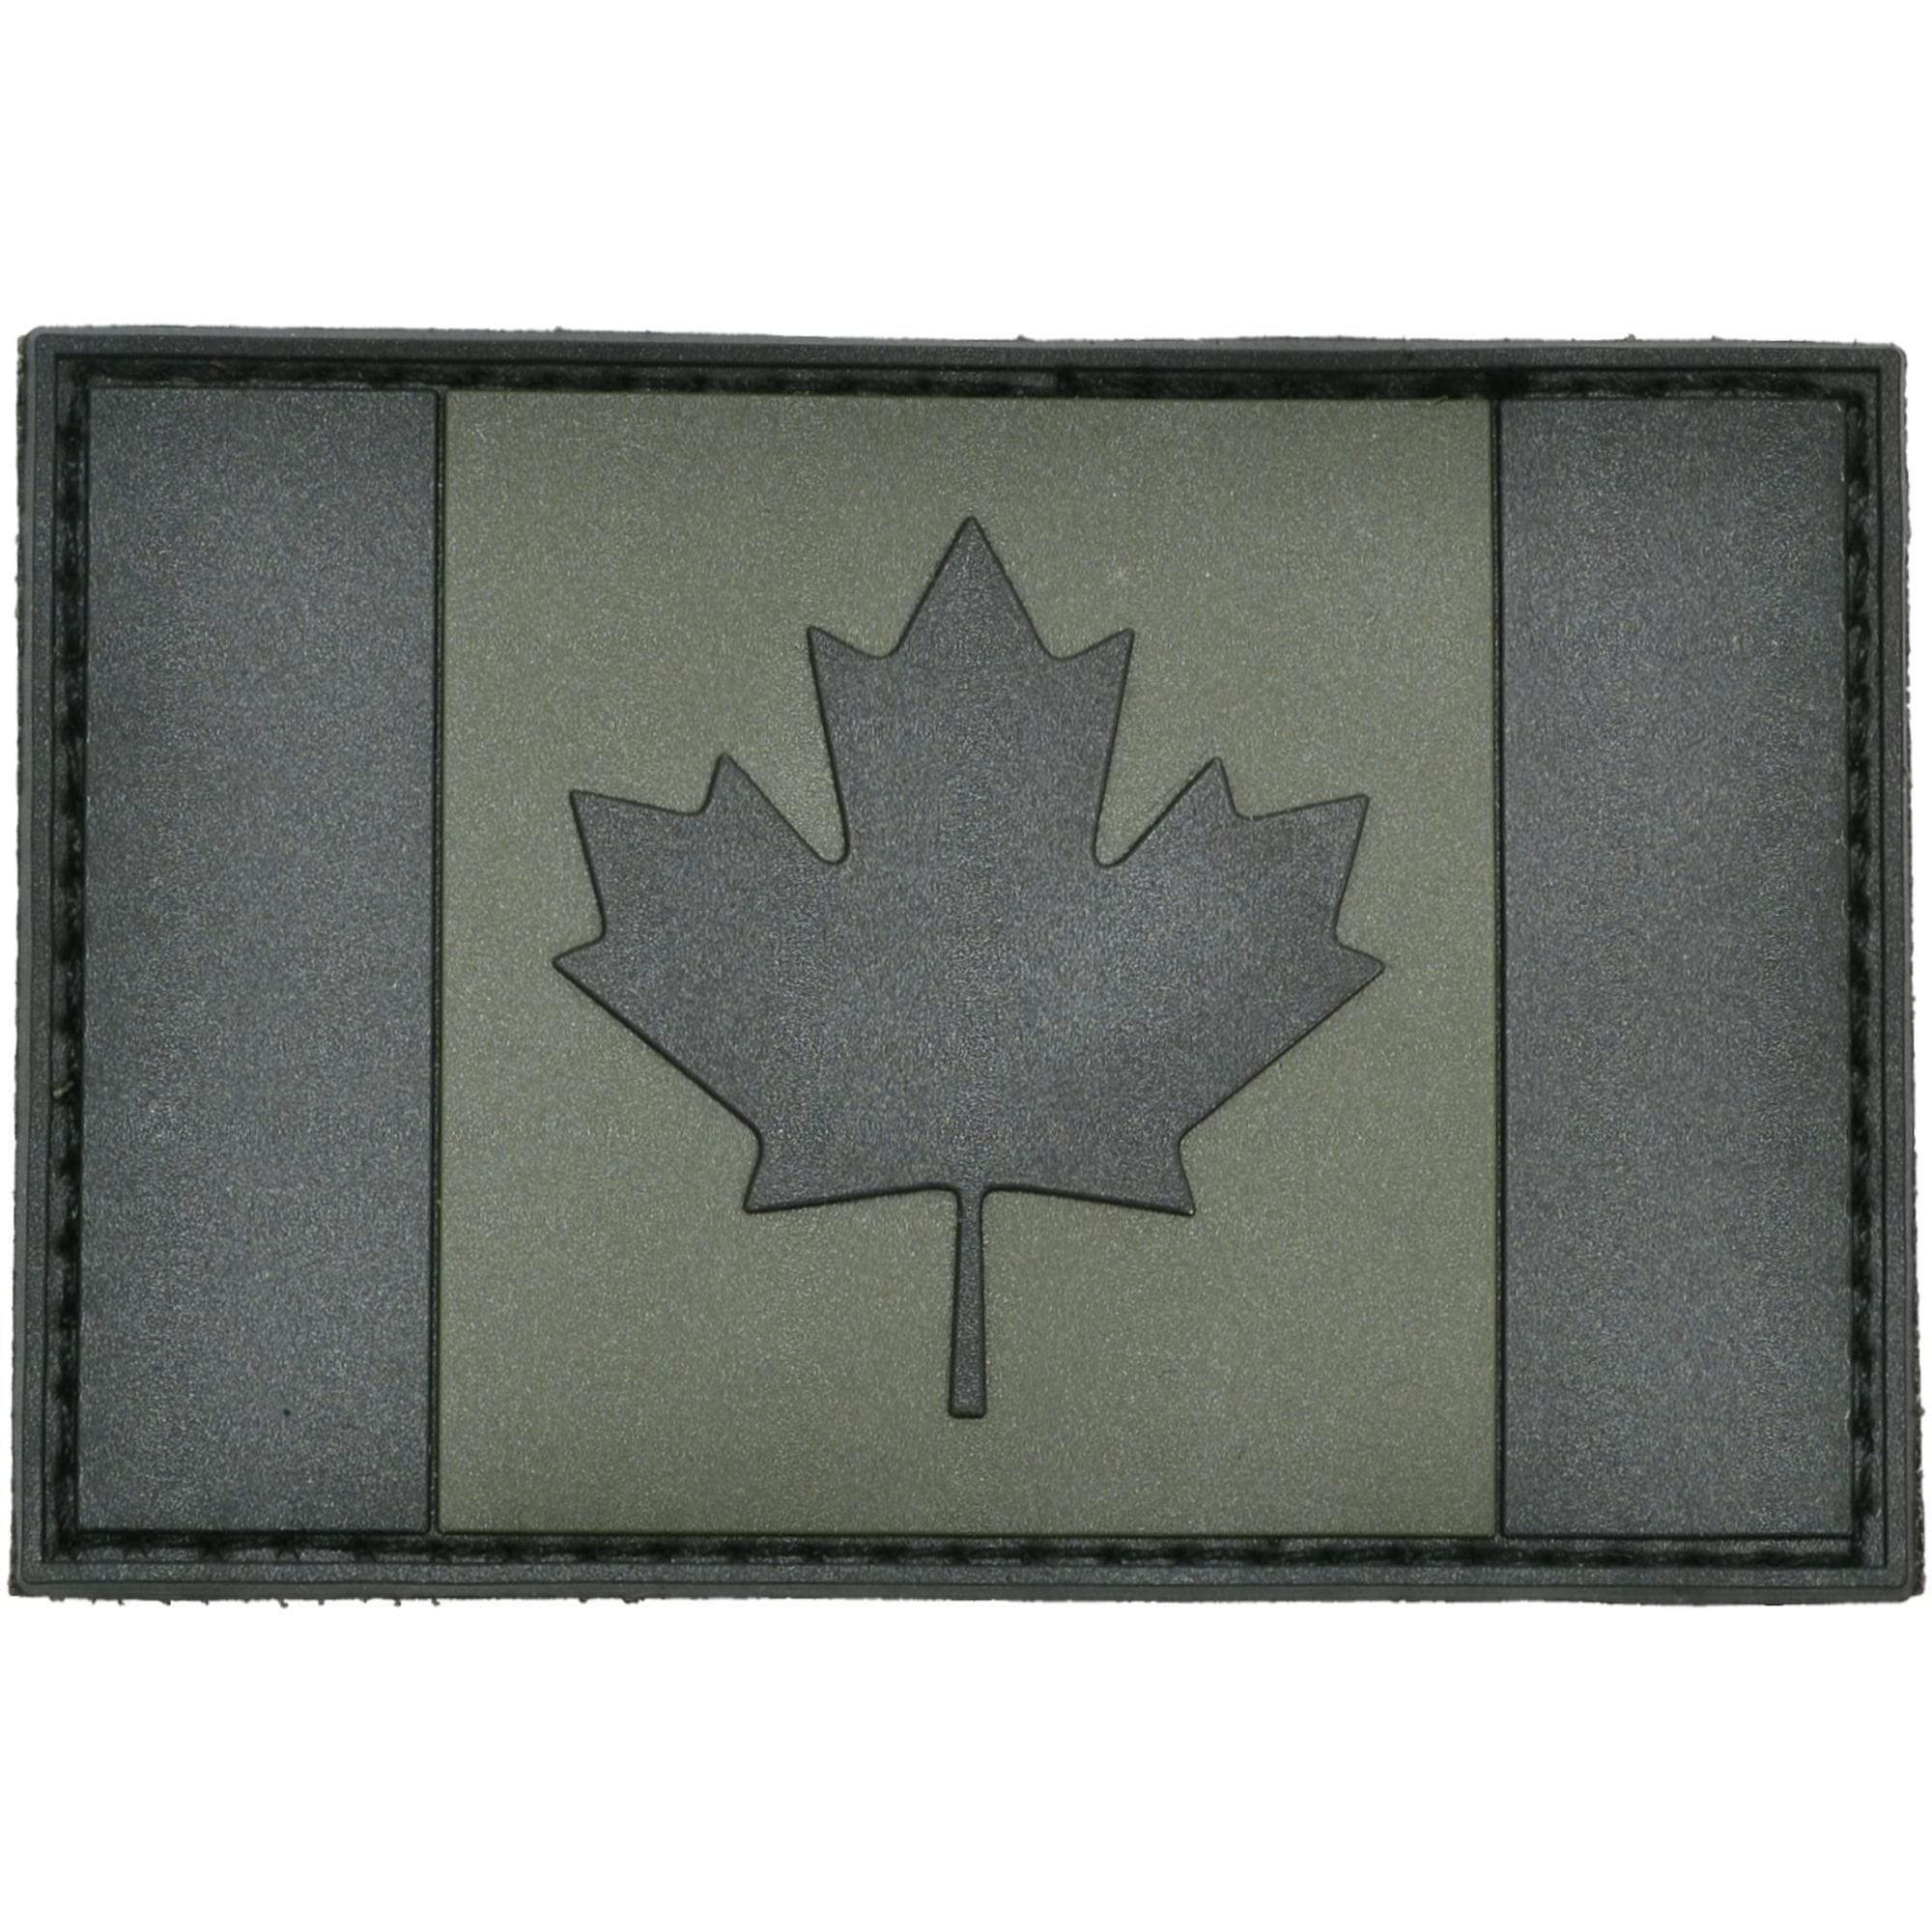 Tactical Gear Junkie Patches Olive Drab Canadian Flag Full Color - 2x3 PVC Patch